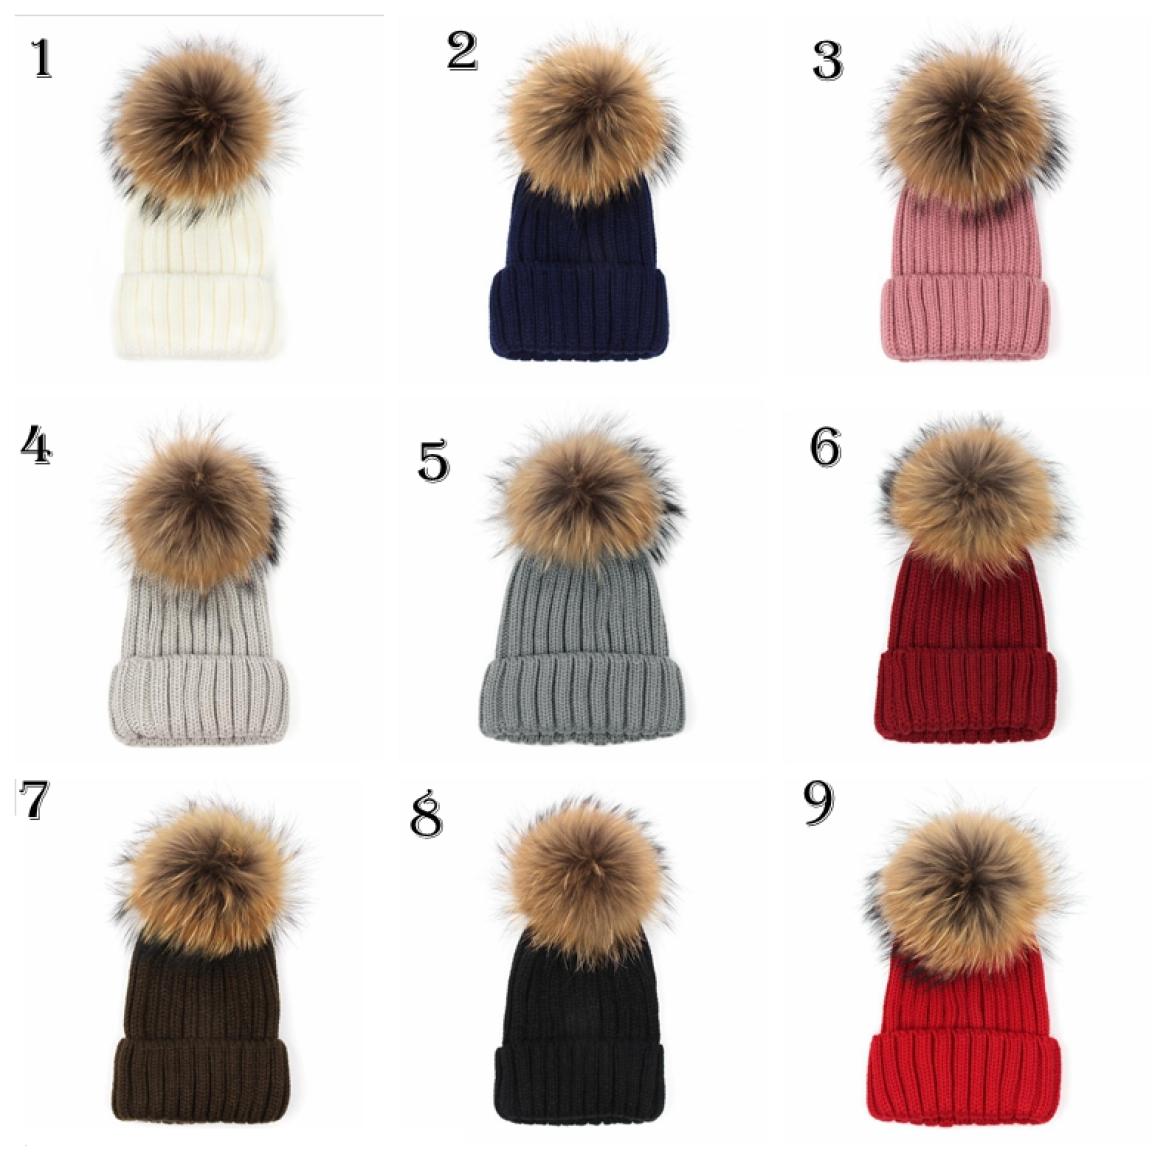 

Quality Removable Real Mink Fox Fur Pom Poms Ball Acrylic Beanies Winter Warm Plain Hats Adults Slouchy Mens Womens Snow Warm Hat 6177297, Red